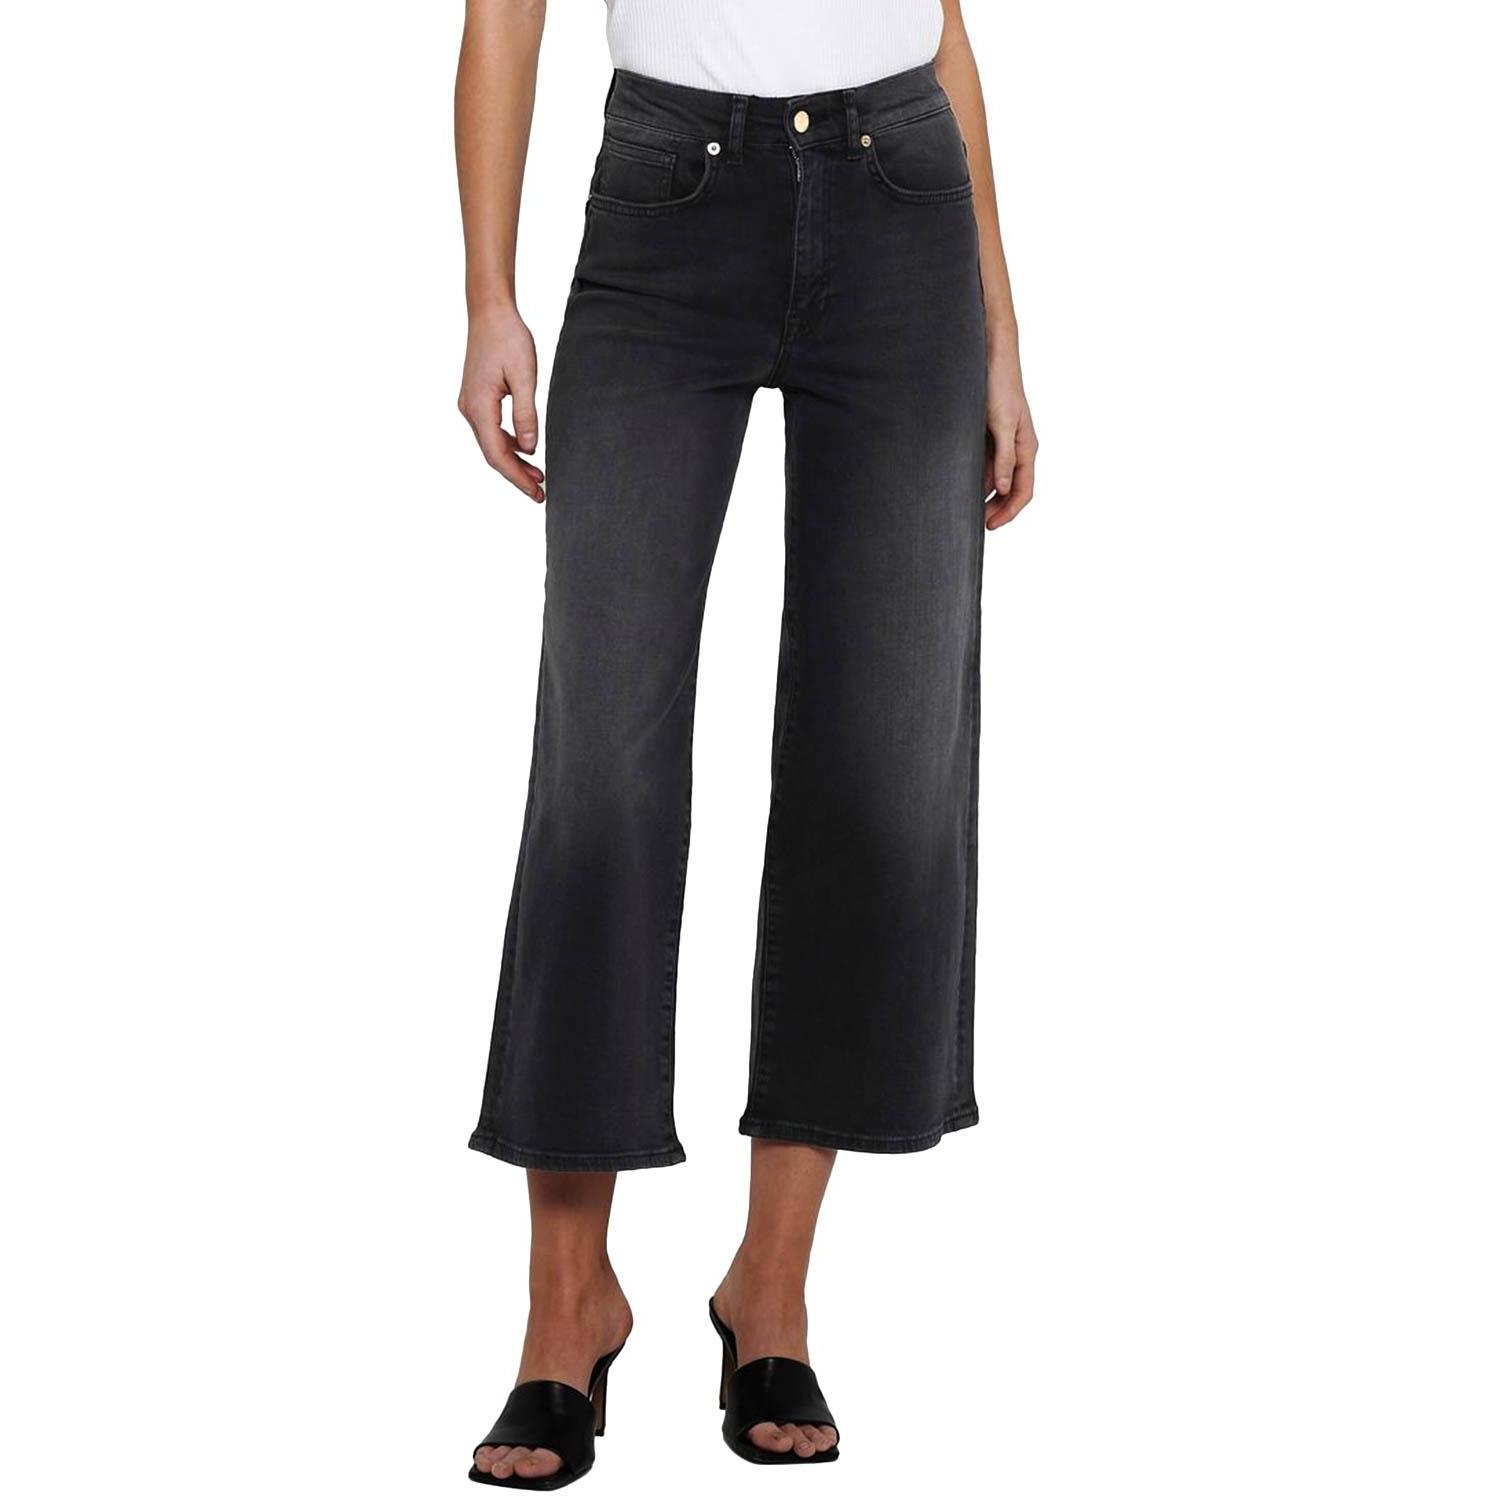 Only - Pantalón Vaquero Only Madison Life Negro Mujer